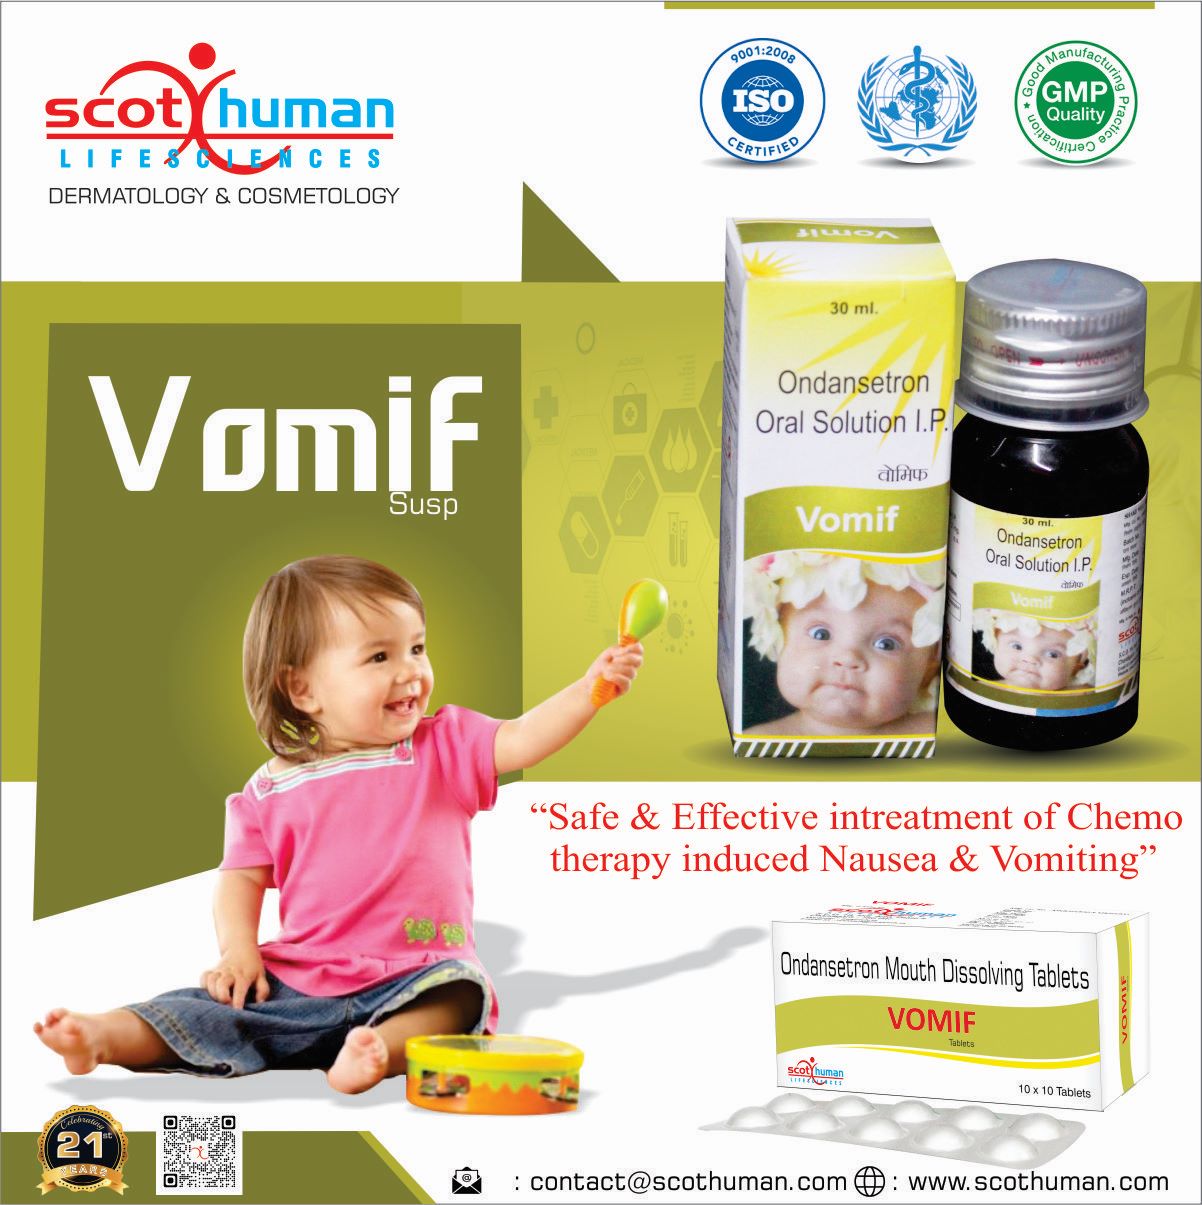 Product Name: Vomif, Compositions of Vomif are Ondansetron Oral Solution IP - Pharma Drugs and Chemicals